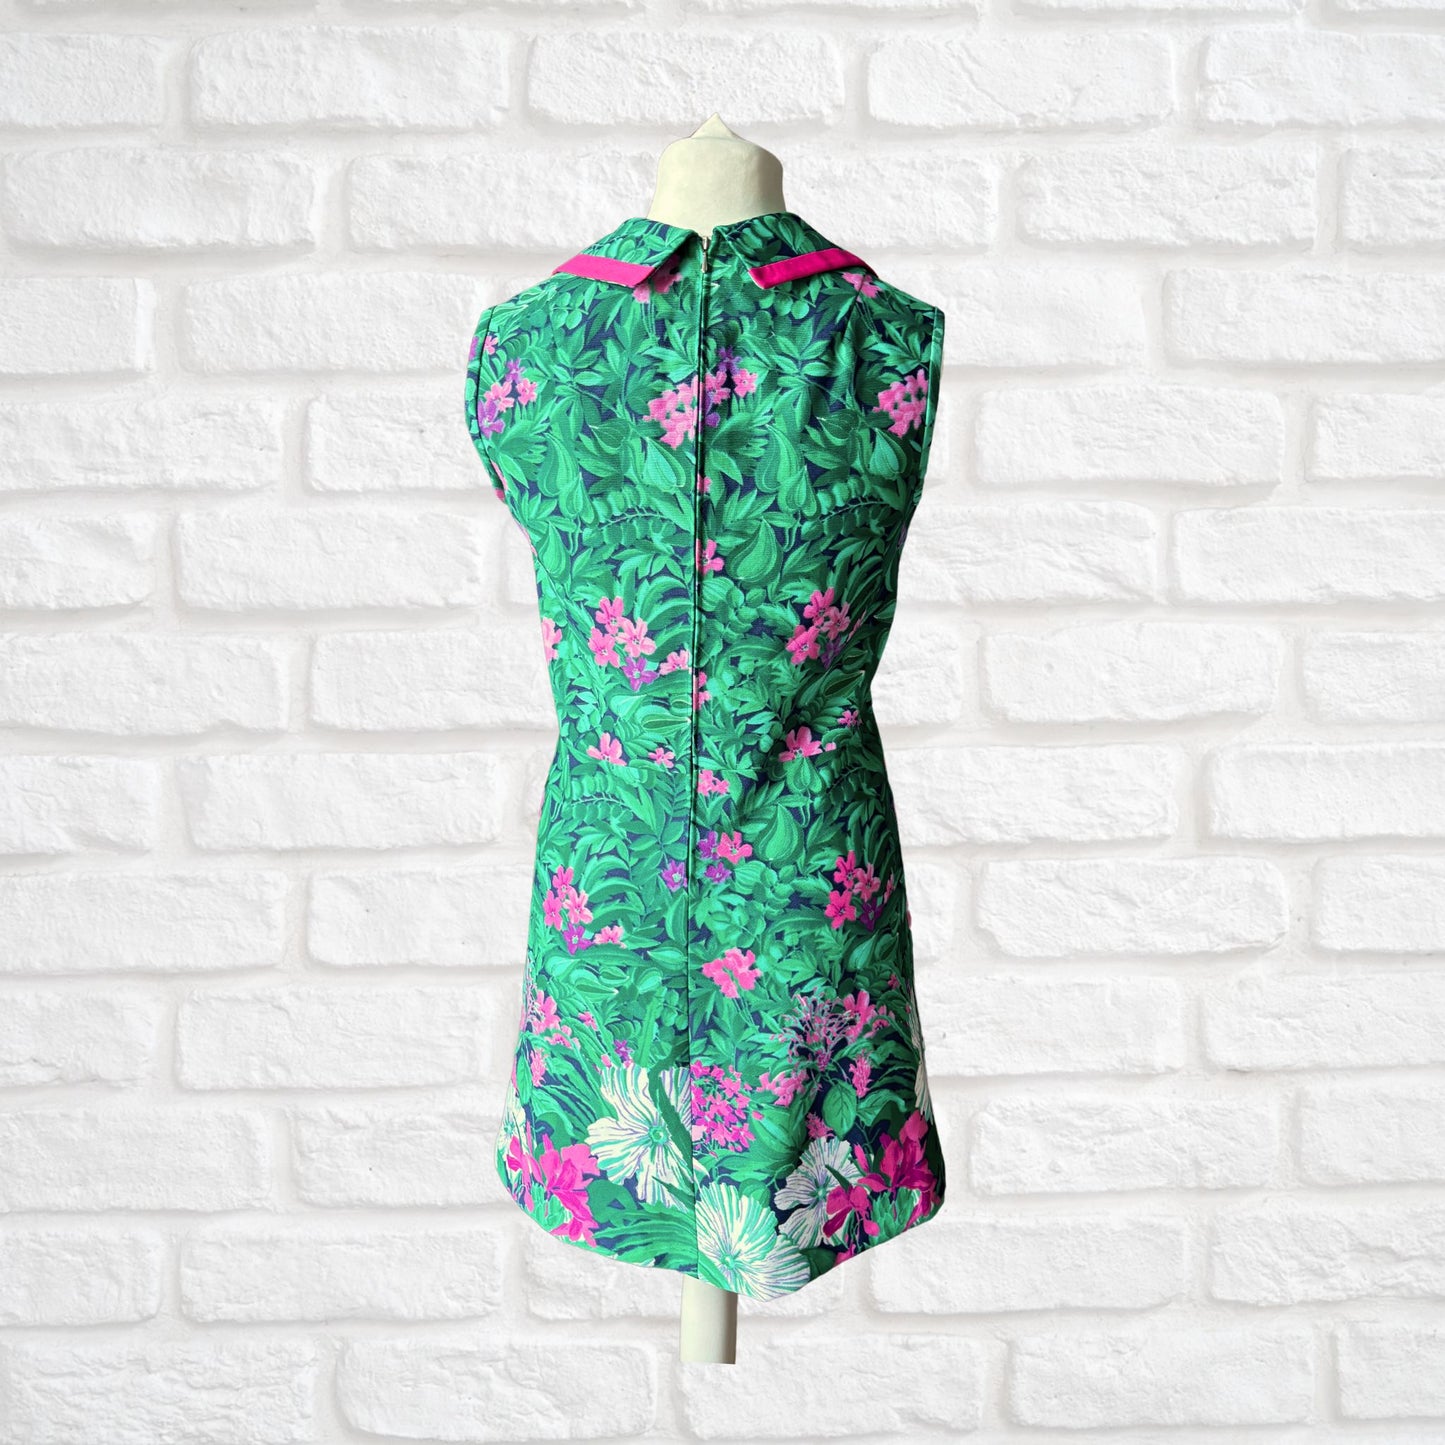 Vintage 60s/70s Tropical Print Sleeveless Summer with V-Neck and Pink Trimmed Collar.Approx UK Size 12-14